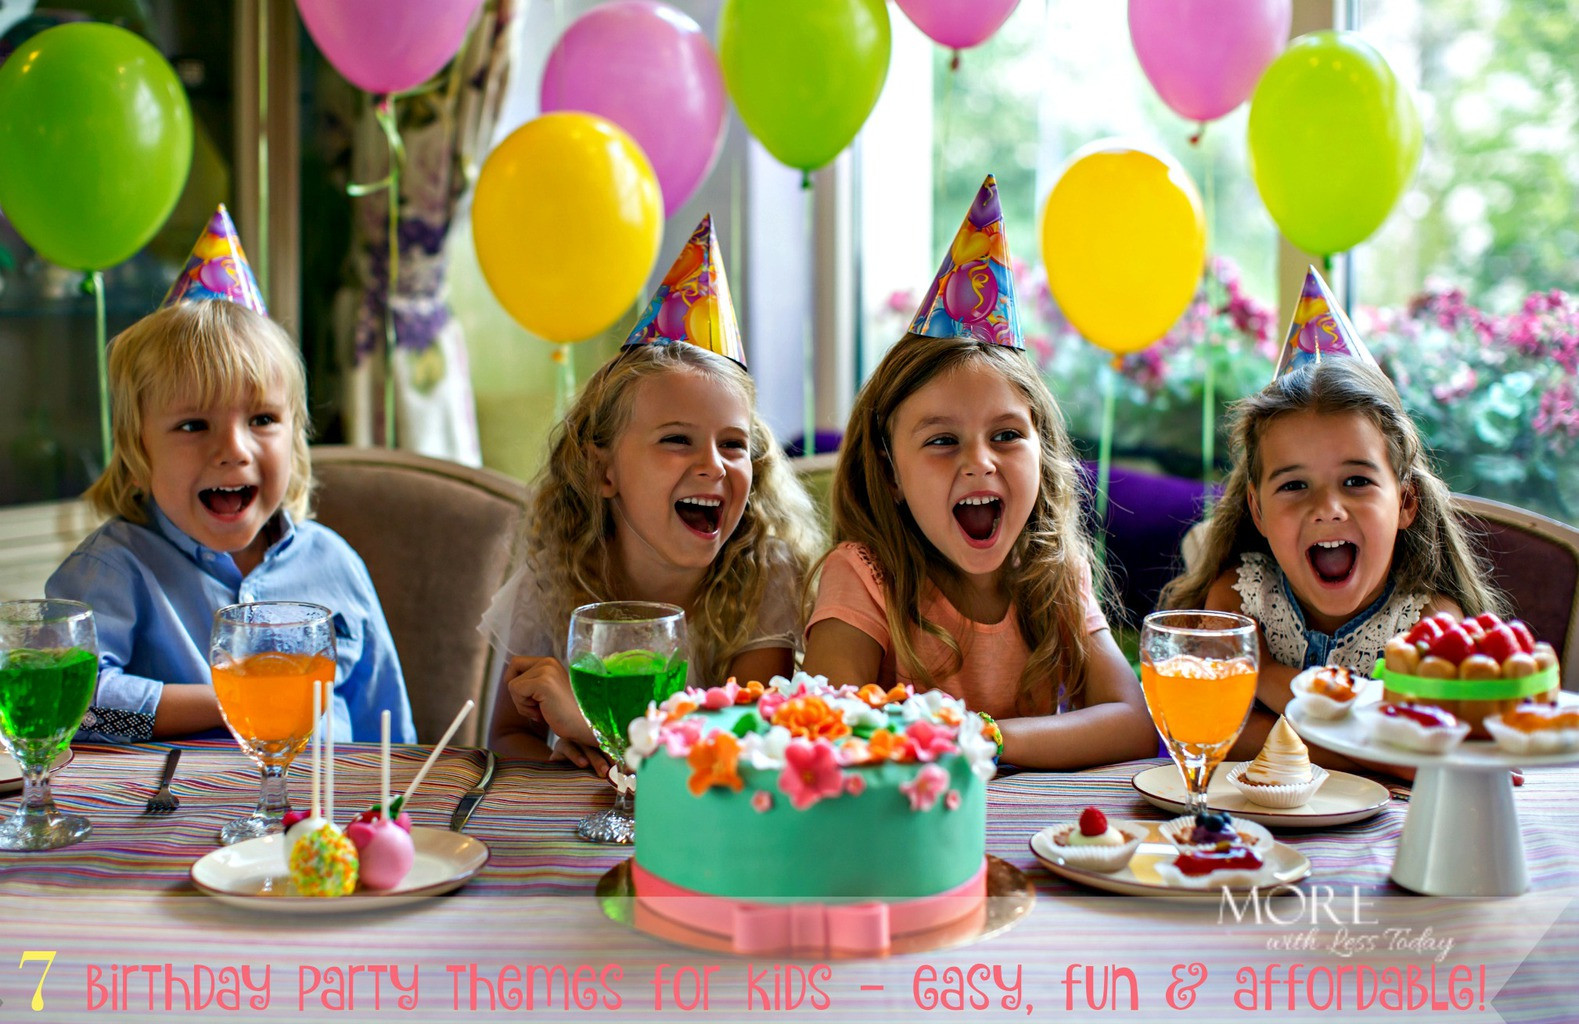 Where To Have Kids Birthday Party
 Fun and Inexpensive Theme Ideas for Kids Birthday Parties